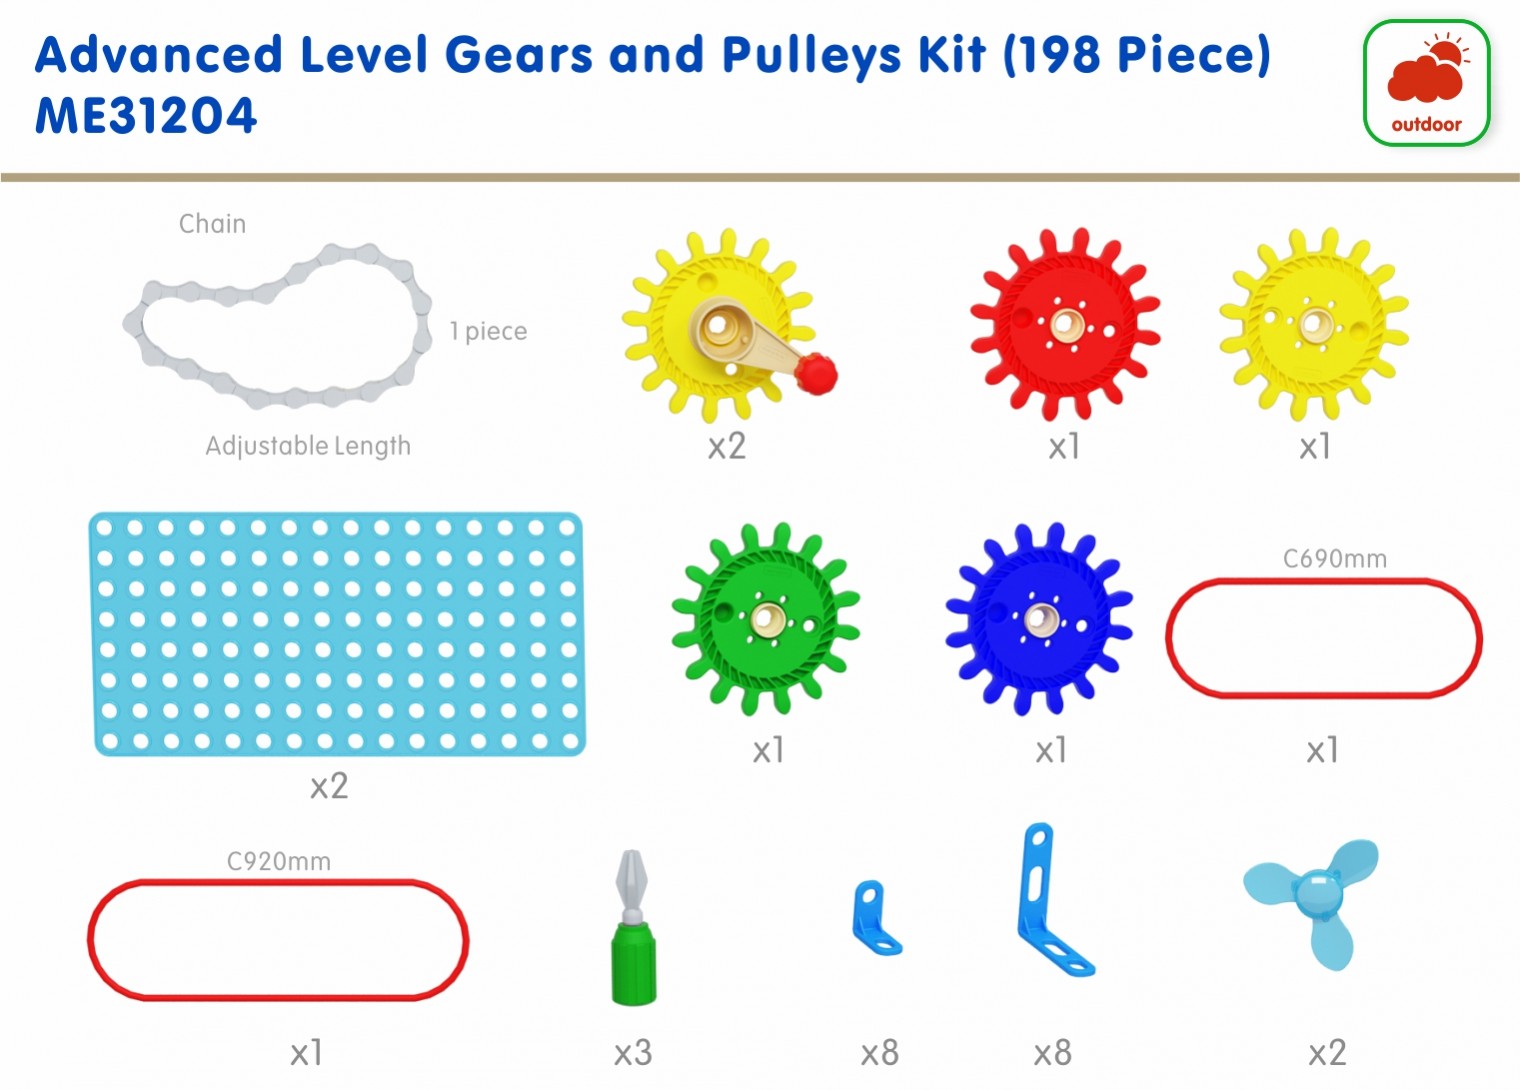 Advanced Level Gears and Pulleys Kit (198 pieces)